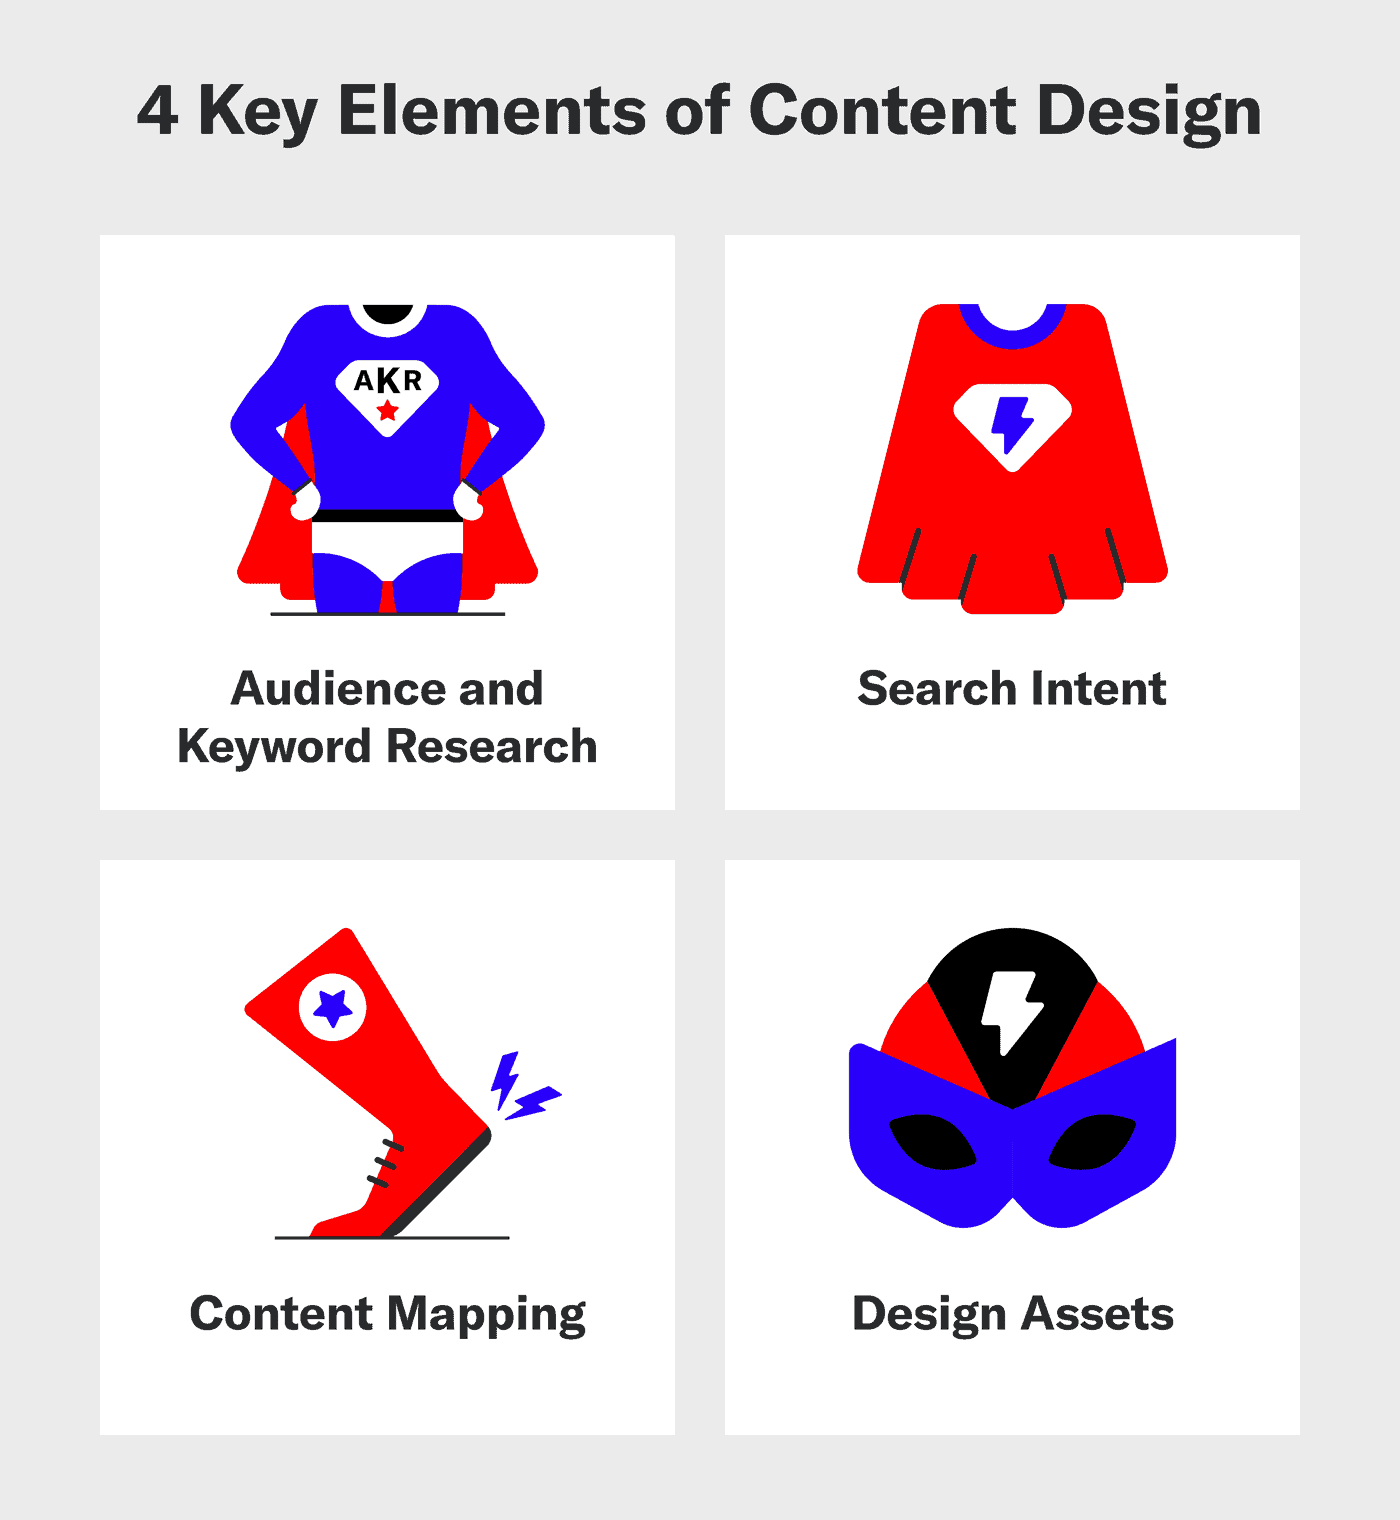 Superhero outfit, cape, shoes, and mask representing the elements of content design.